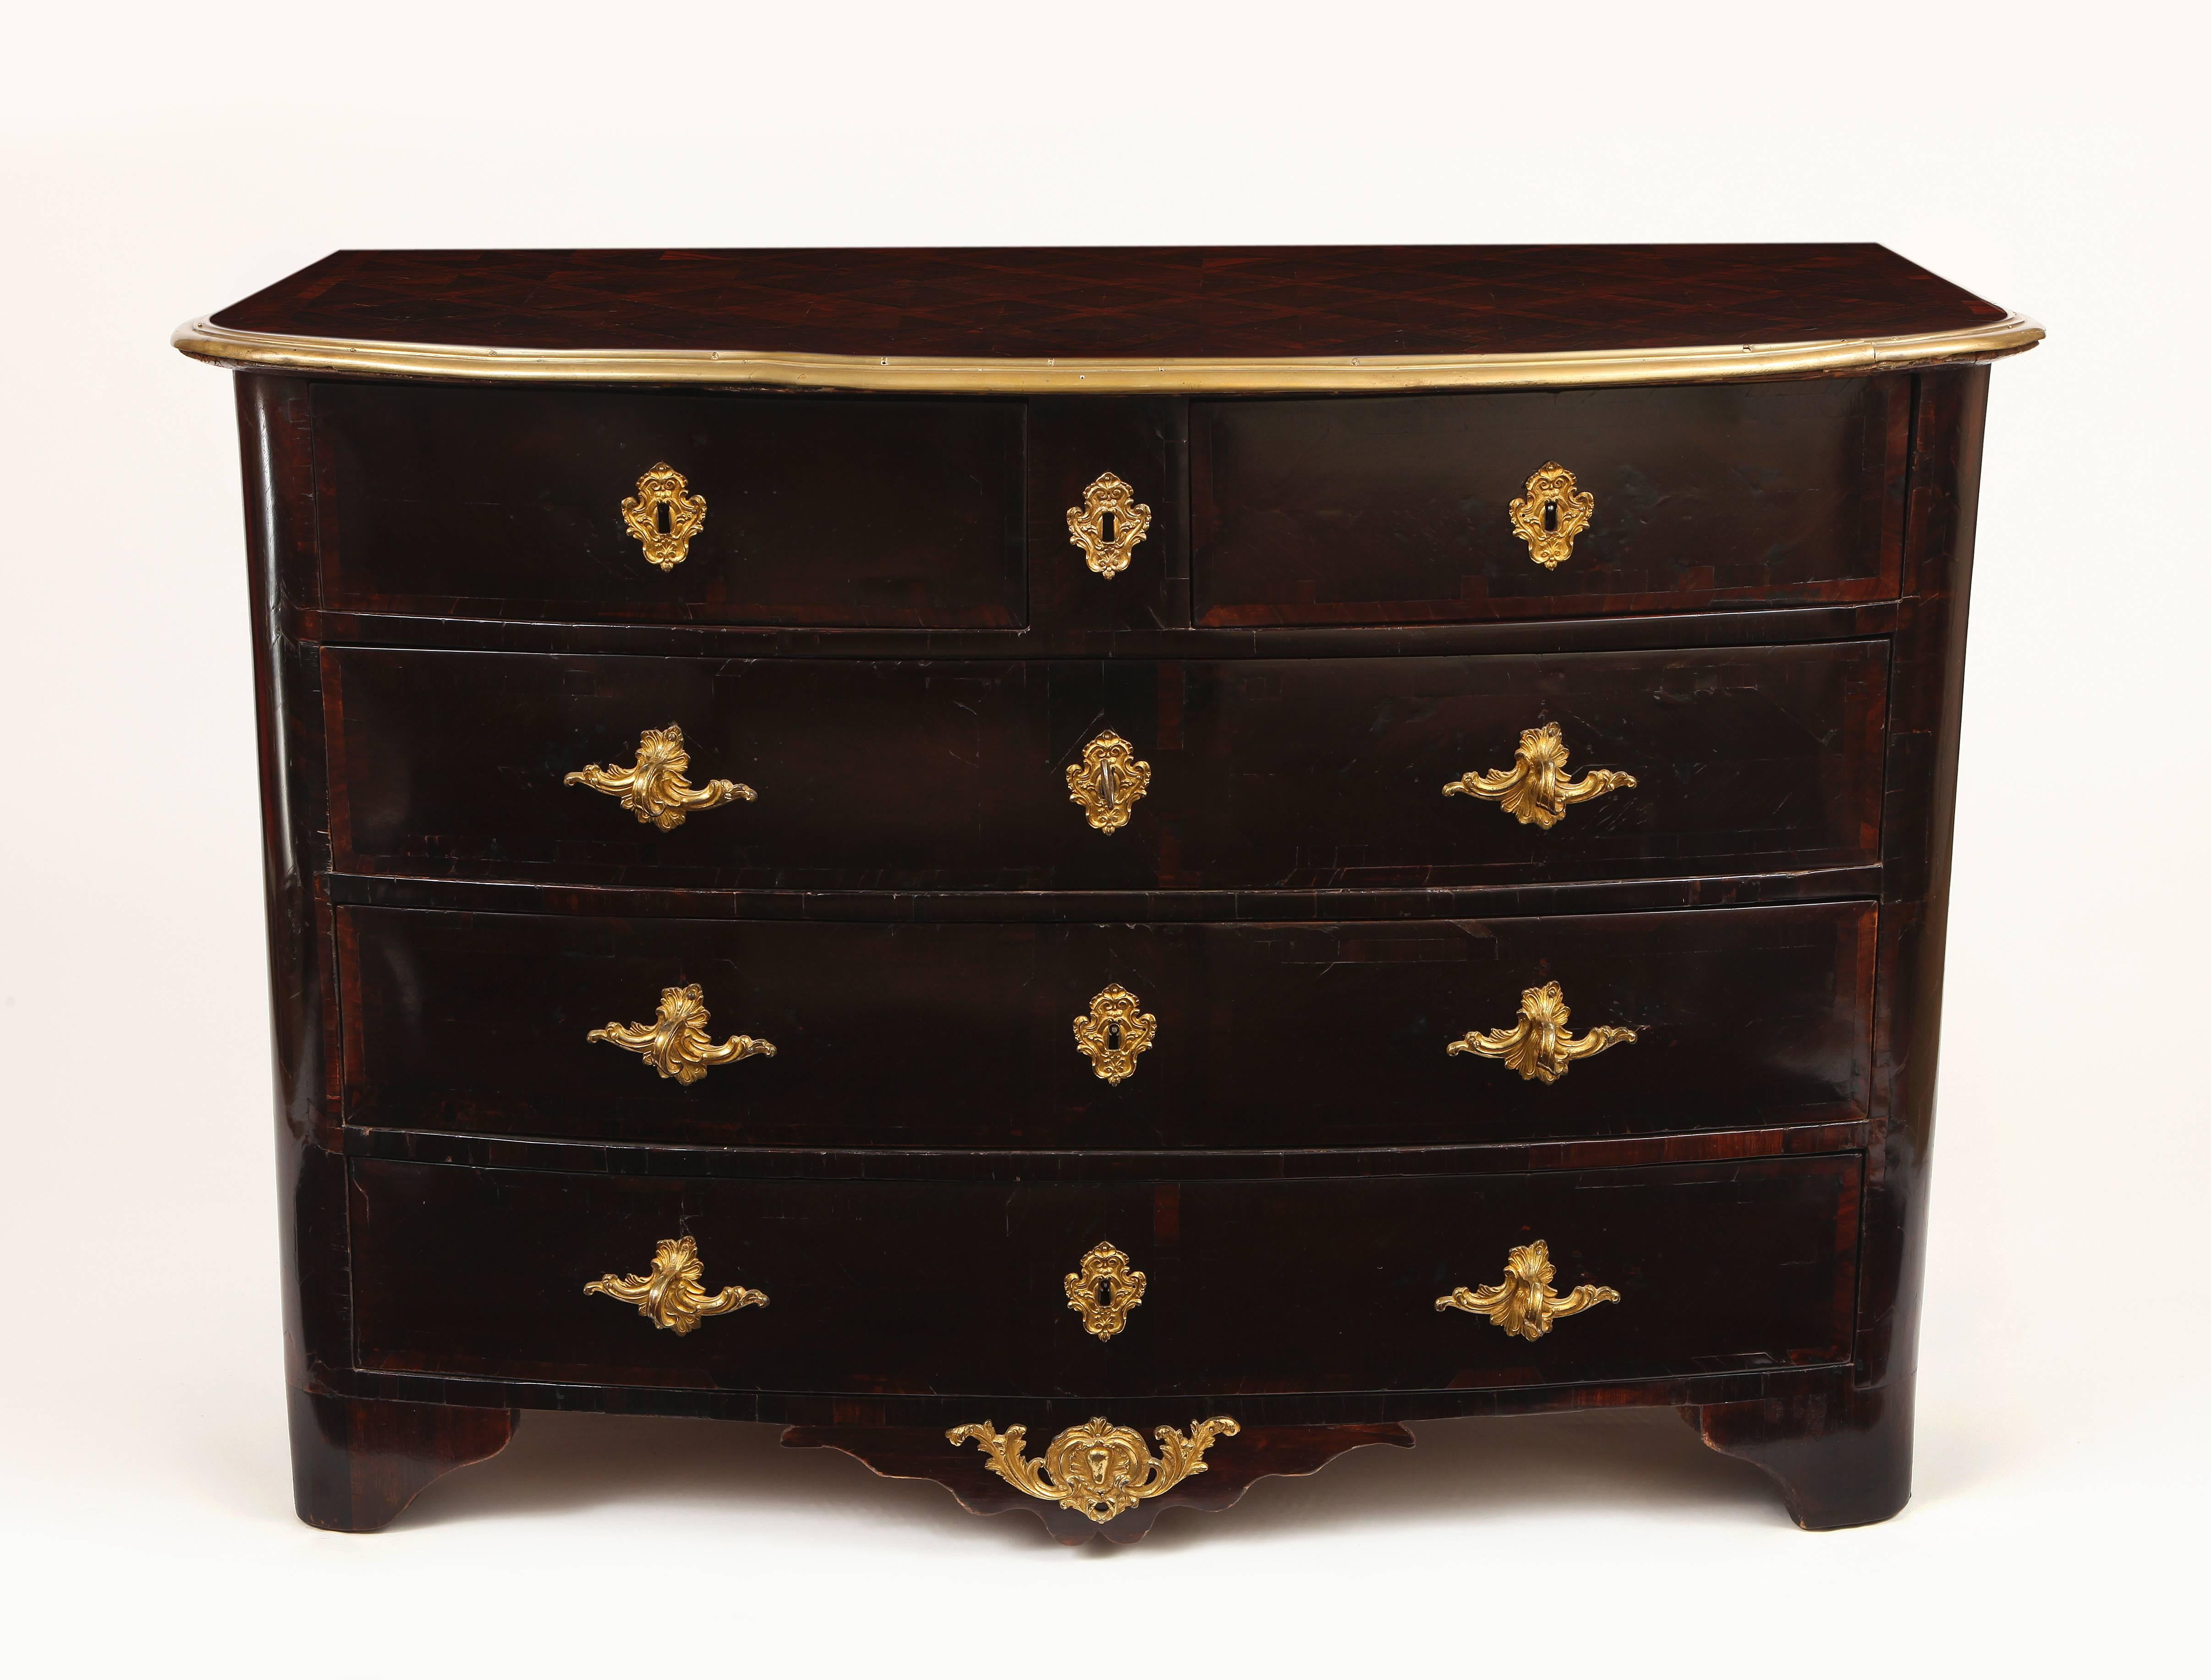 This commode was part of the fine French furniture selected by Sister Parish with Ann Loeb Bronfman for the Bronfman’s triplex apartment at 740 Park Avenue, which was the first collaboration between Sister Parish and Albert Hadley and one of the